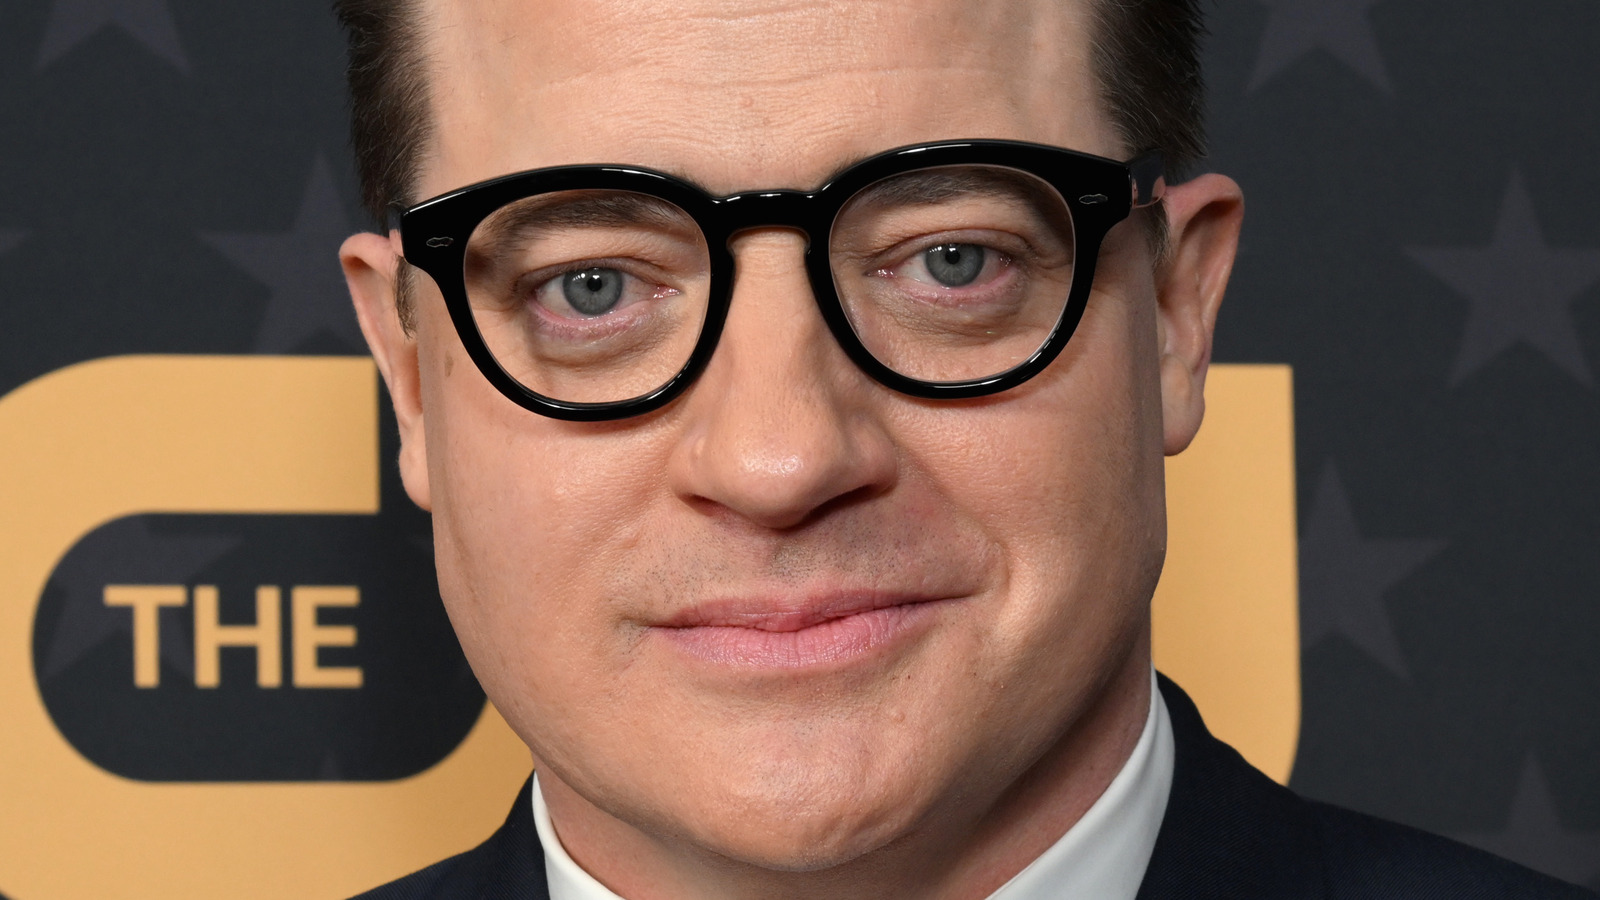 Brendan Fraser Takes Home The Critic's Choice Award For Best Actor